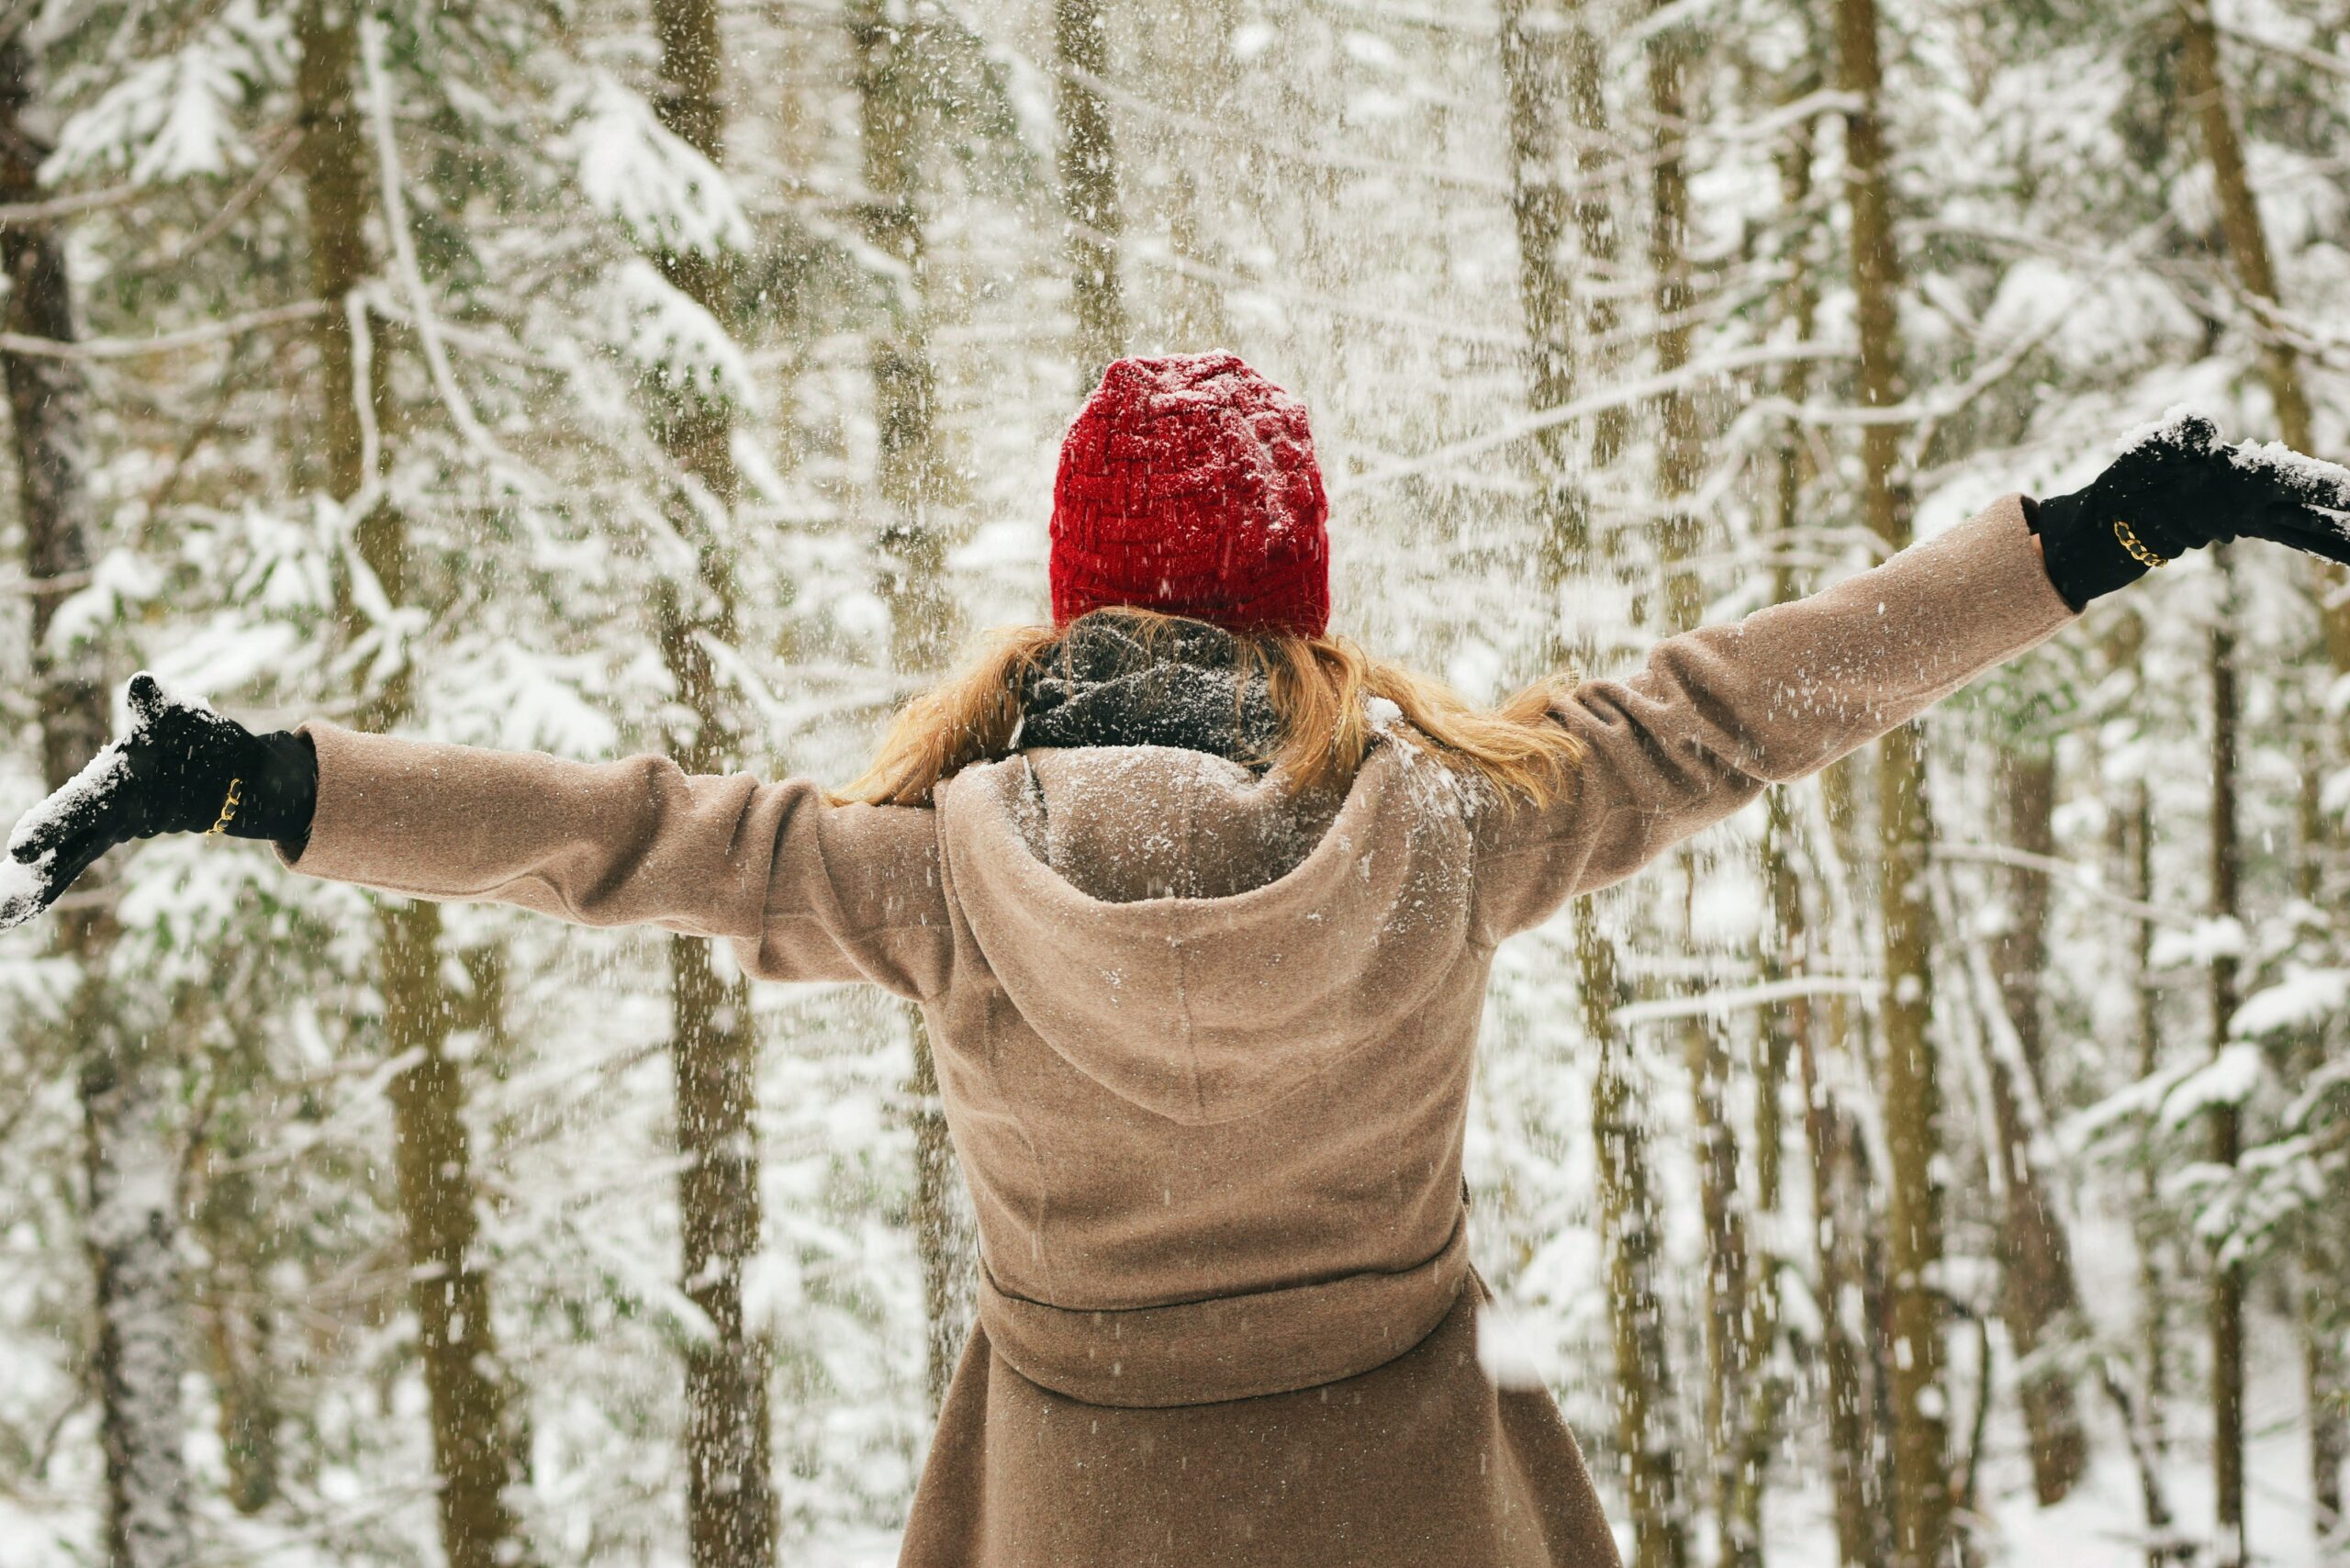 Woman with her arms outstretched in a snowy forest